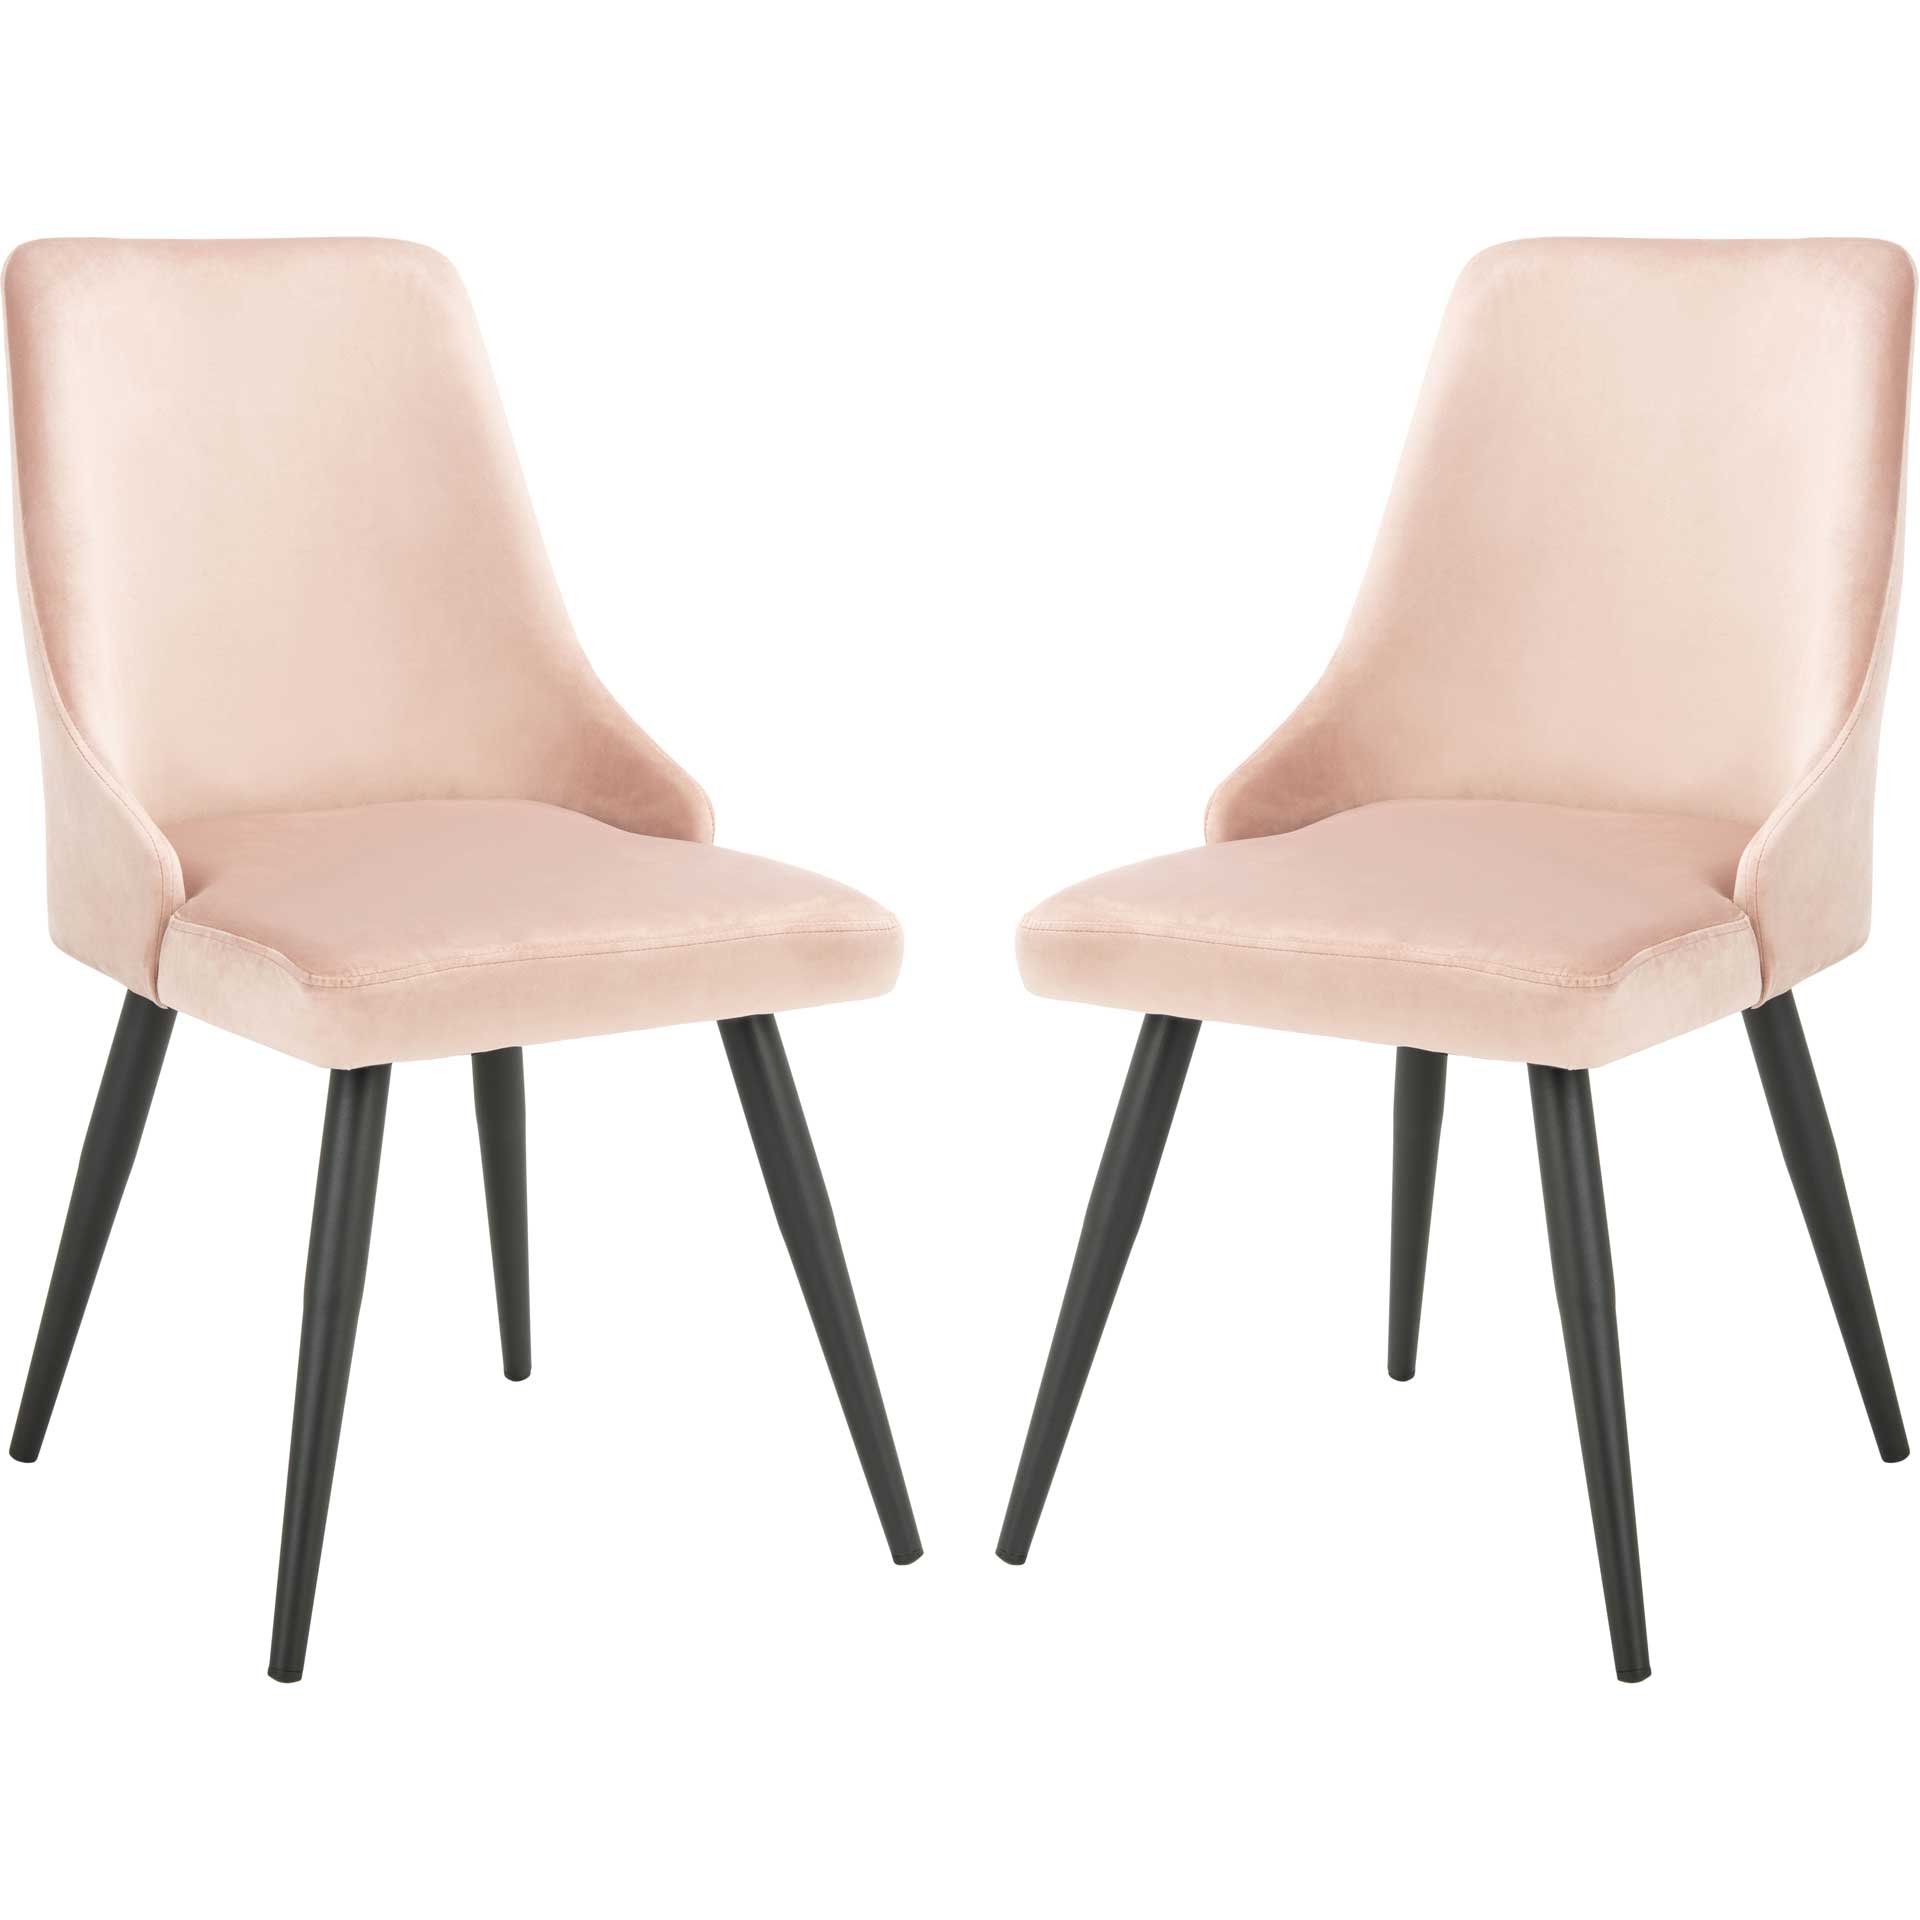 Zola Upholstered Dining Chair Dusty Blush/Black (Set of 2)